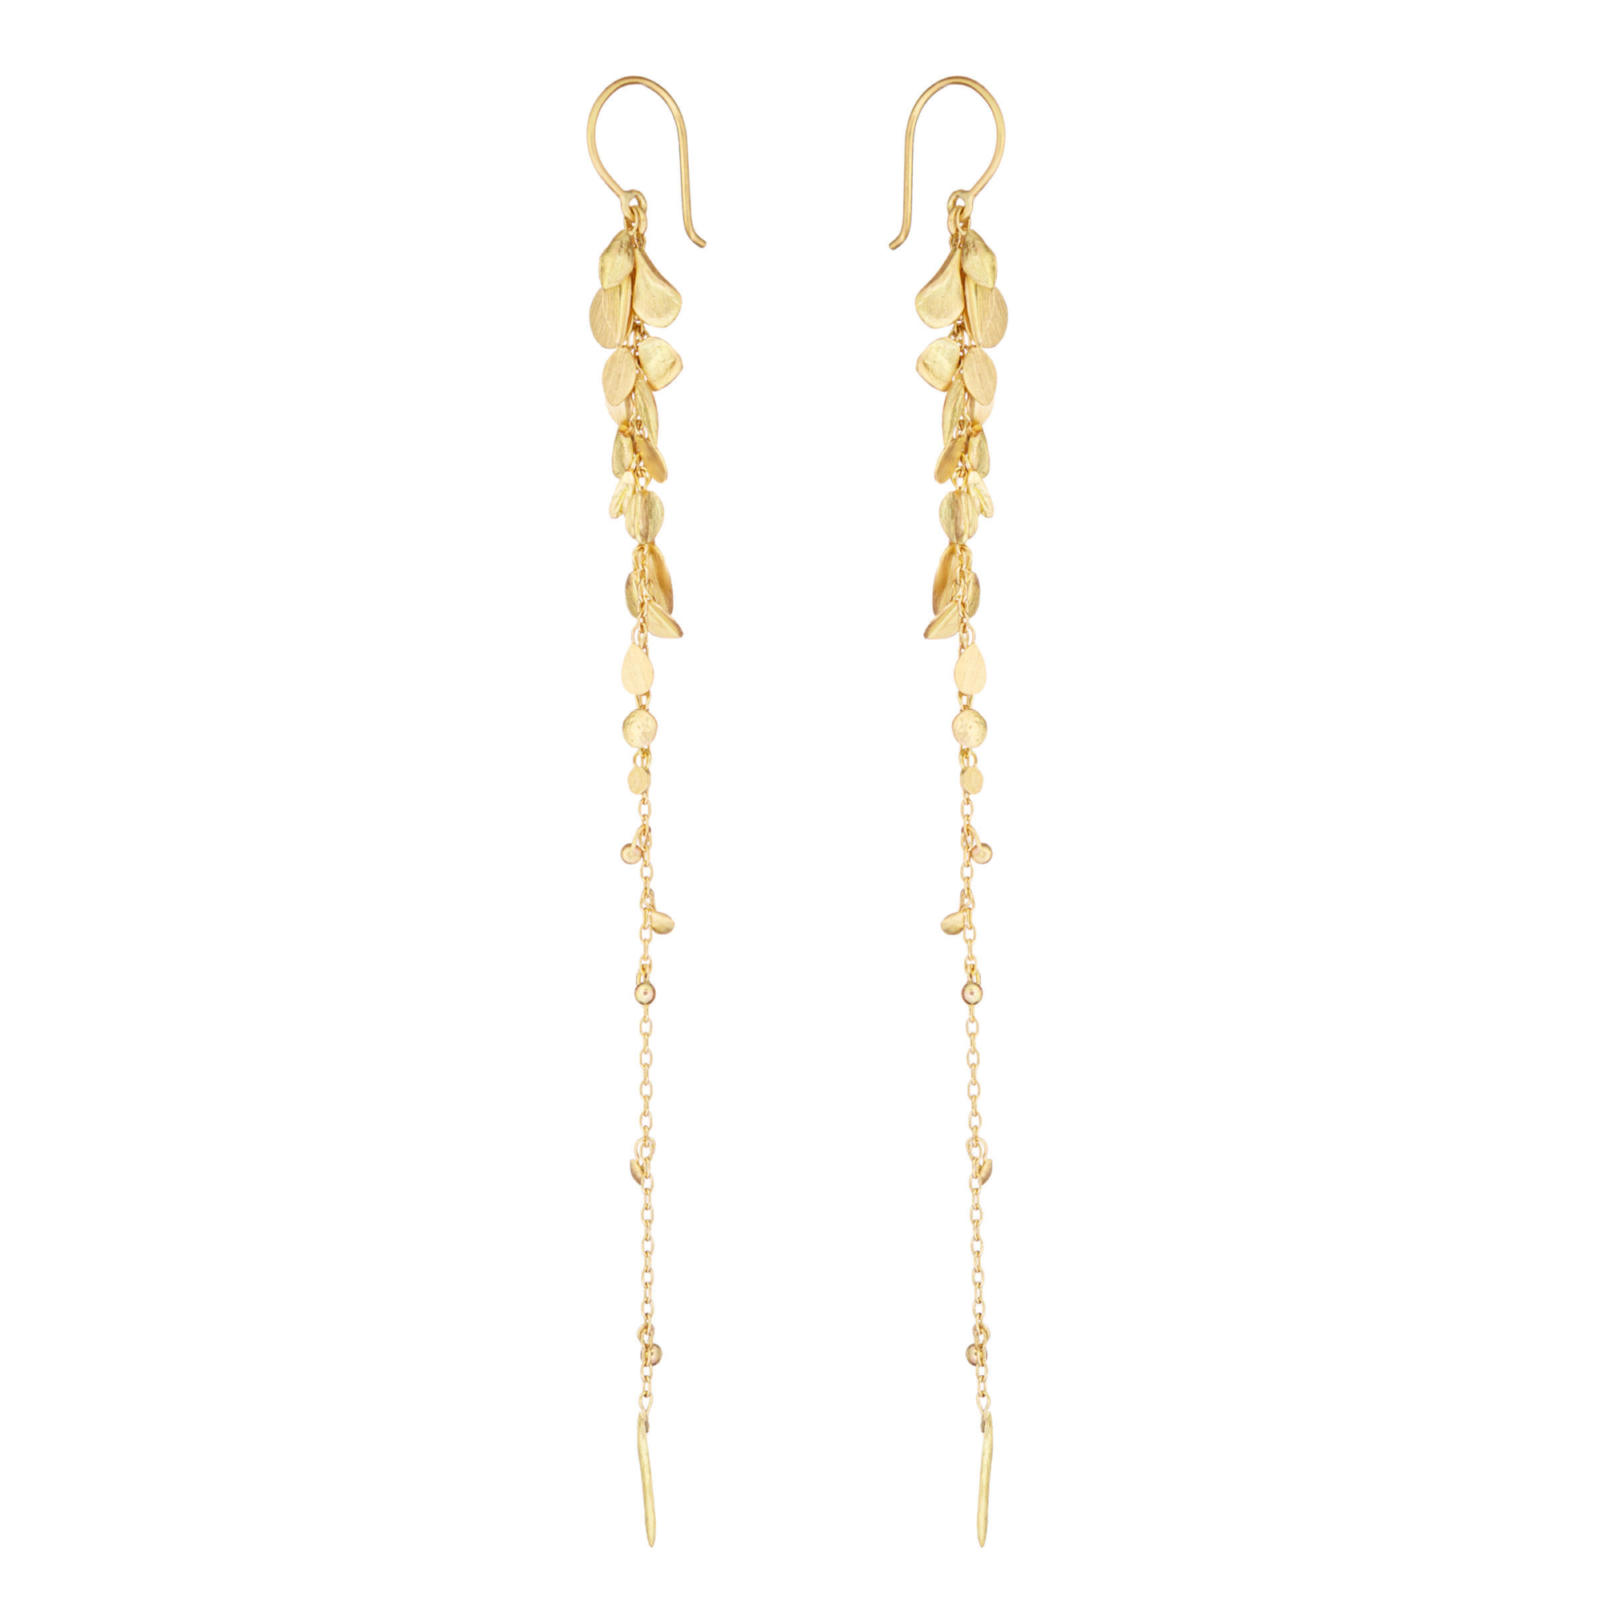 Sia Taylor ME1 Y Yellow Gold Earrings S